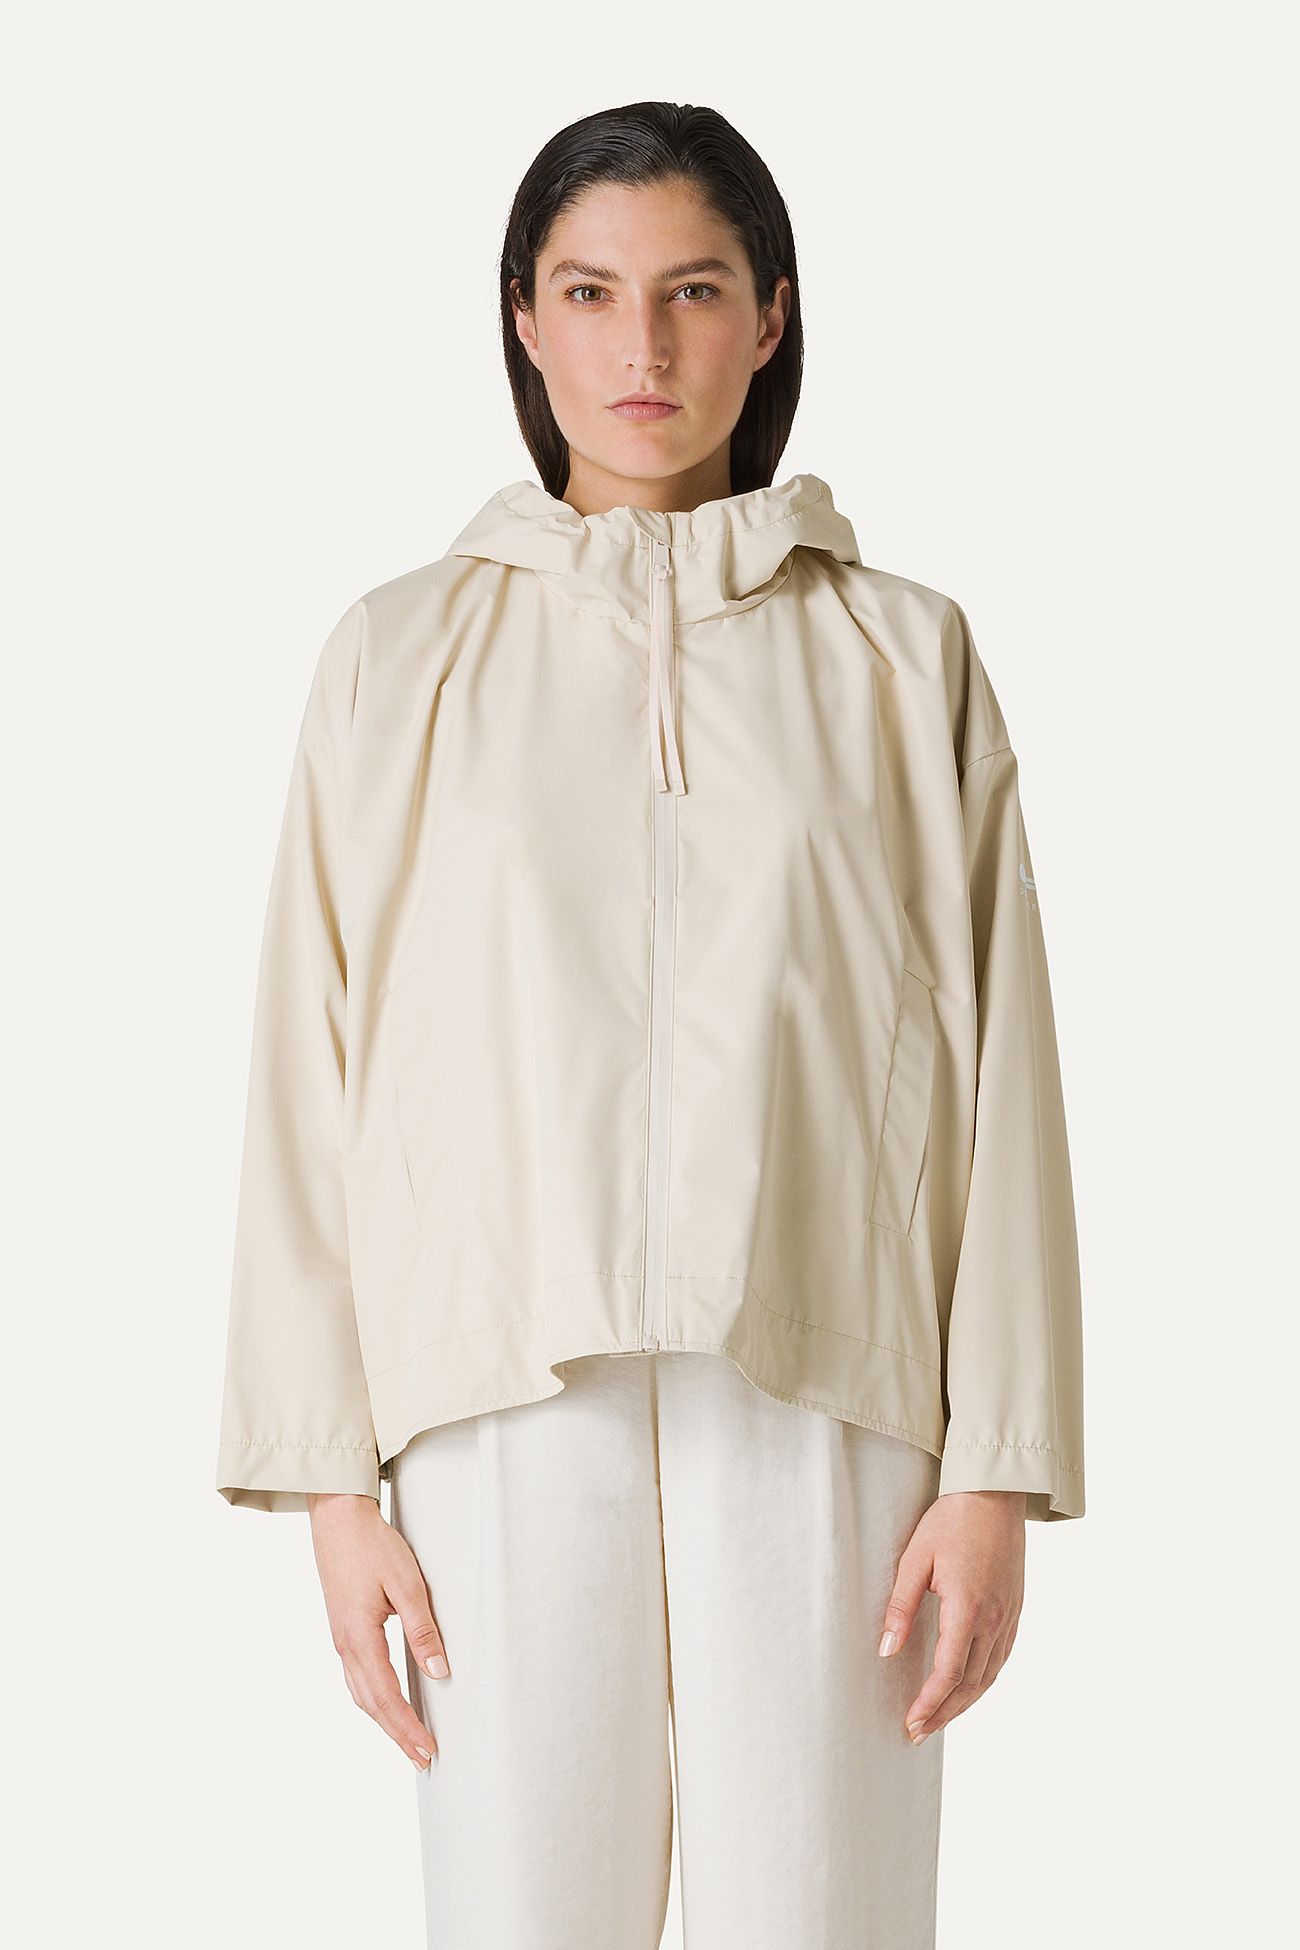 SHORT NYLON JACKET WITH SILVER LINING 9214 - CREAM - OOF WEAR